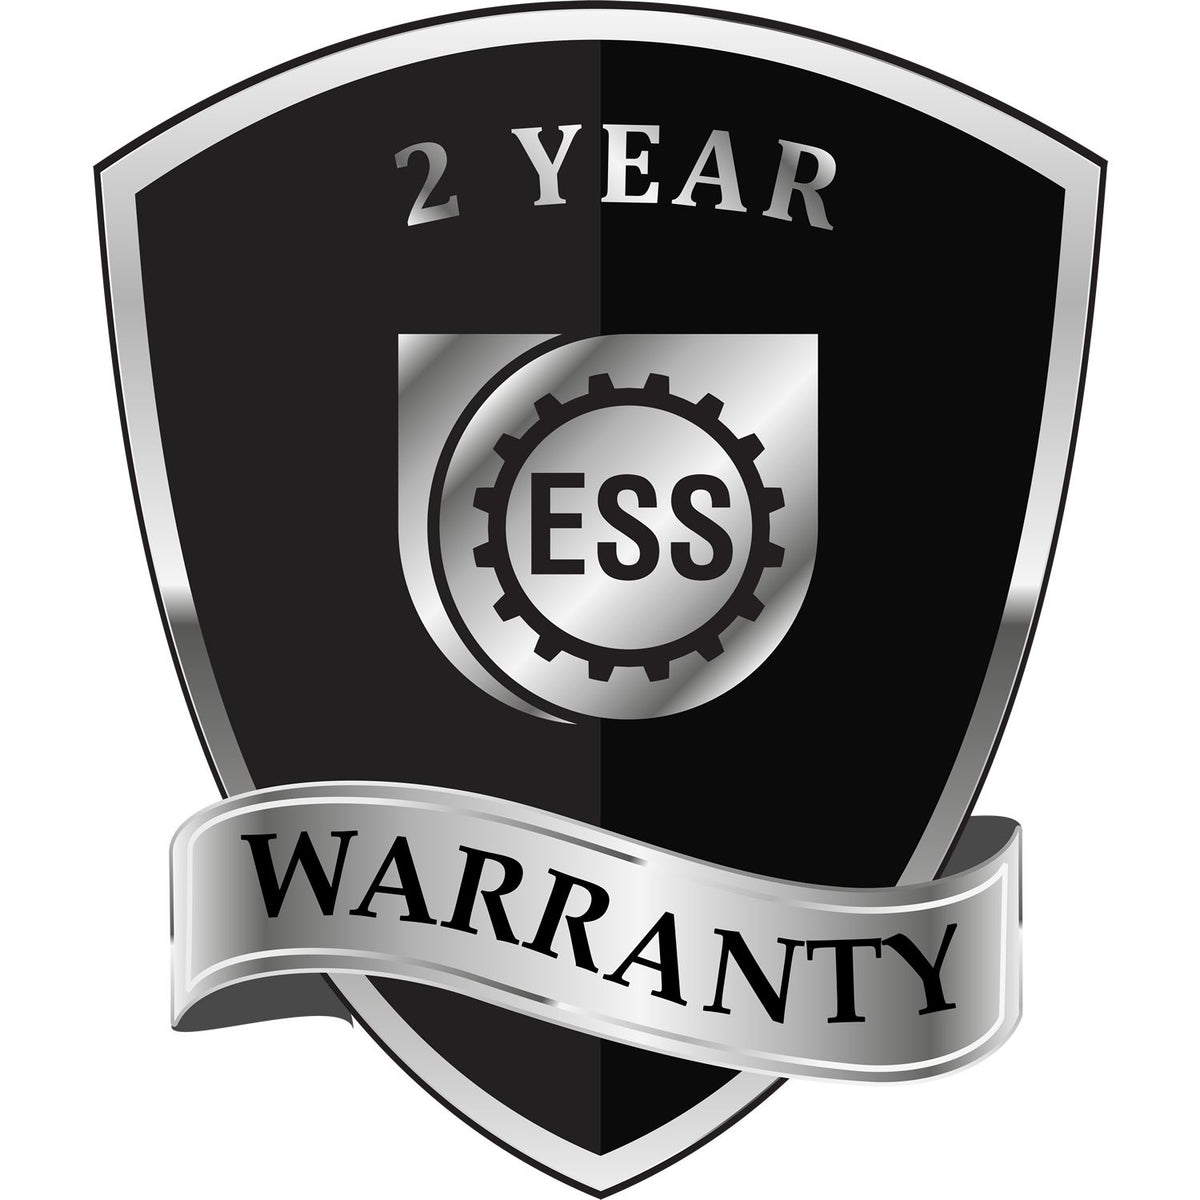 A badge or emblem showing a warranty icon for the Soft Washington Professional Engineer Seal